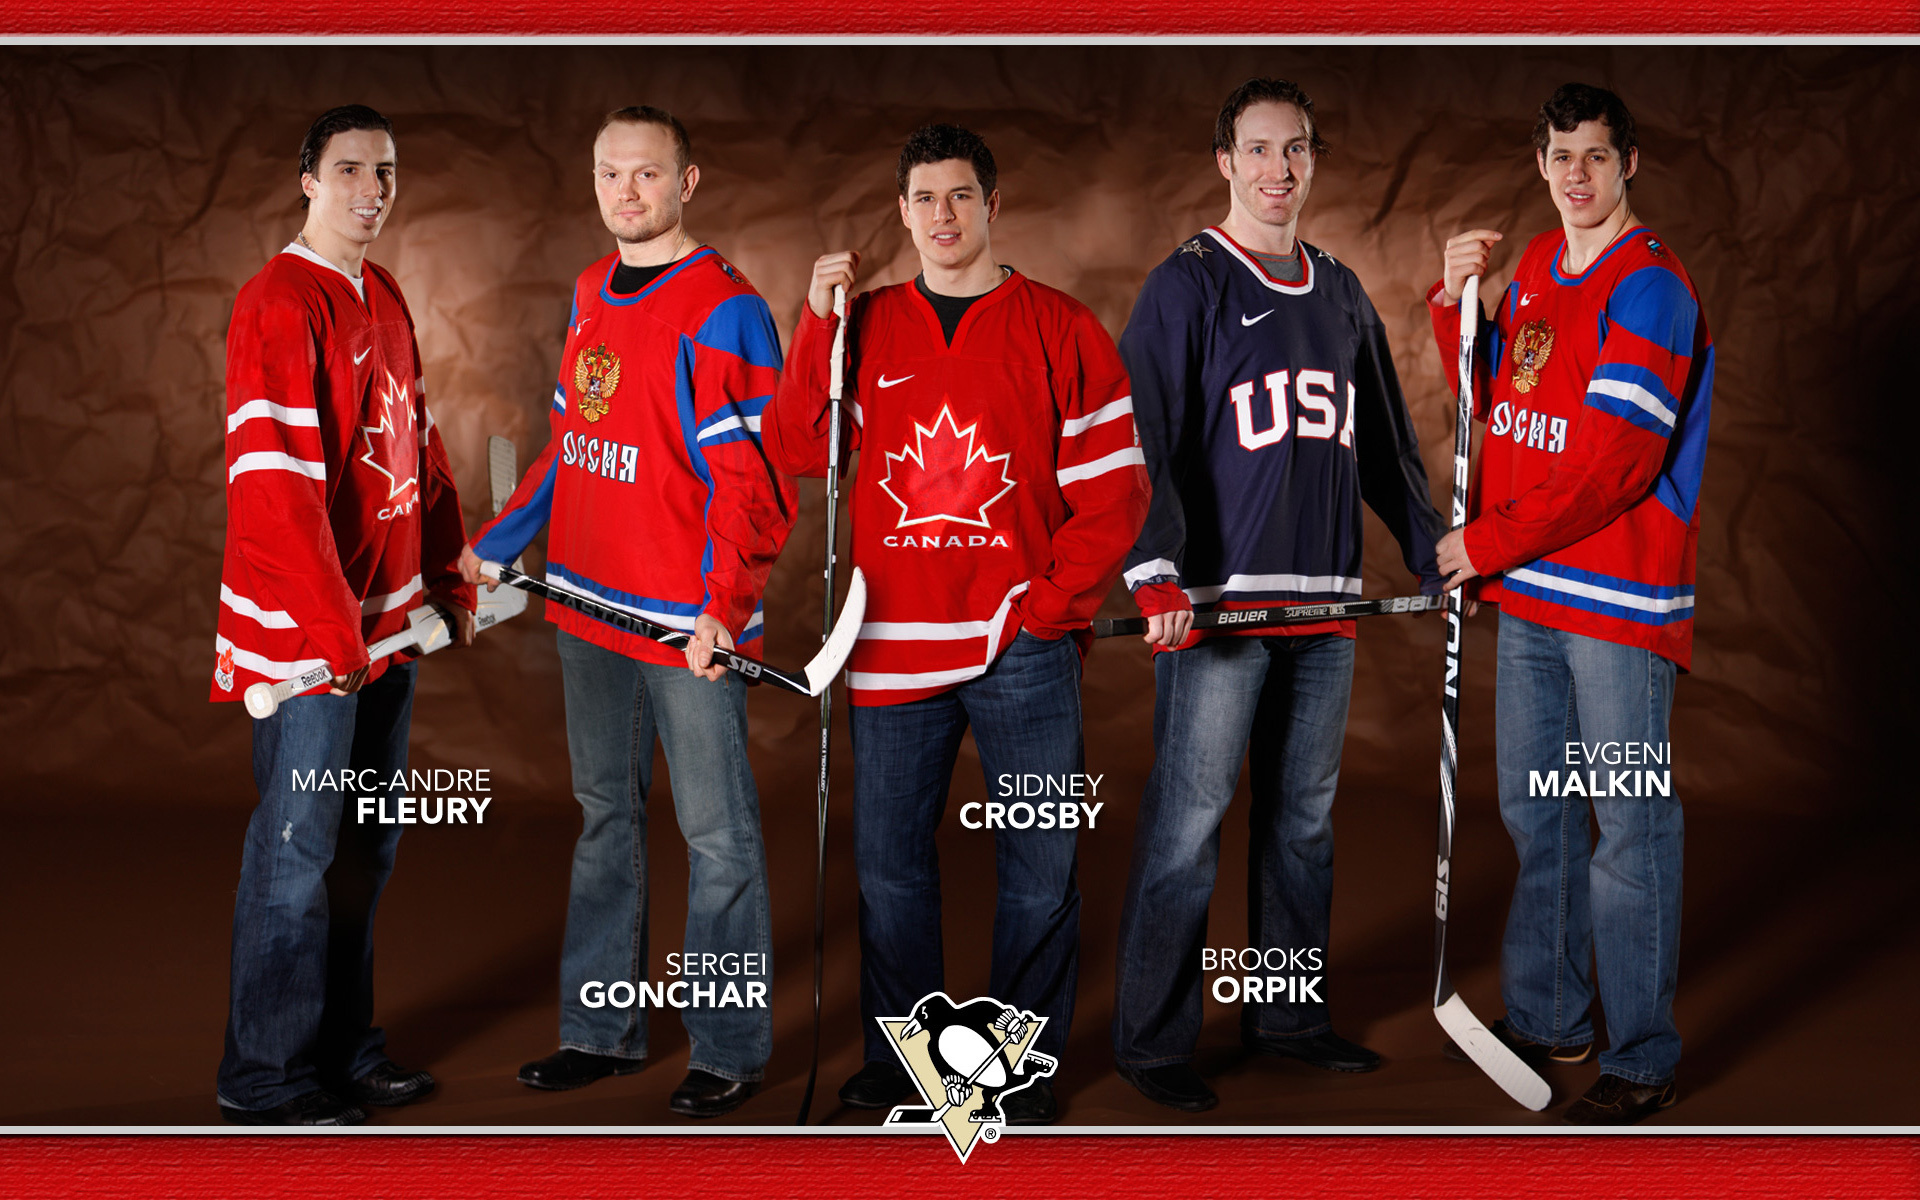 Penguins In The 2010 Winter Olympics - Sidney Crosby Olympics 2010 - HD Wallpaper 